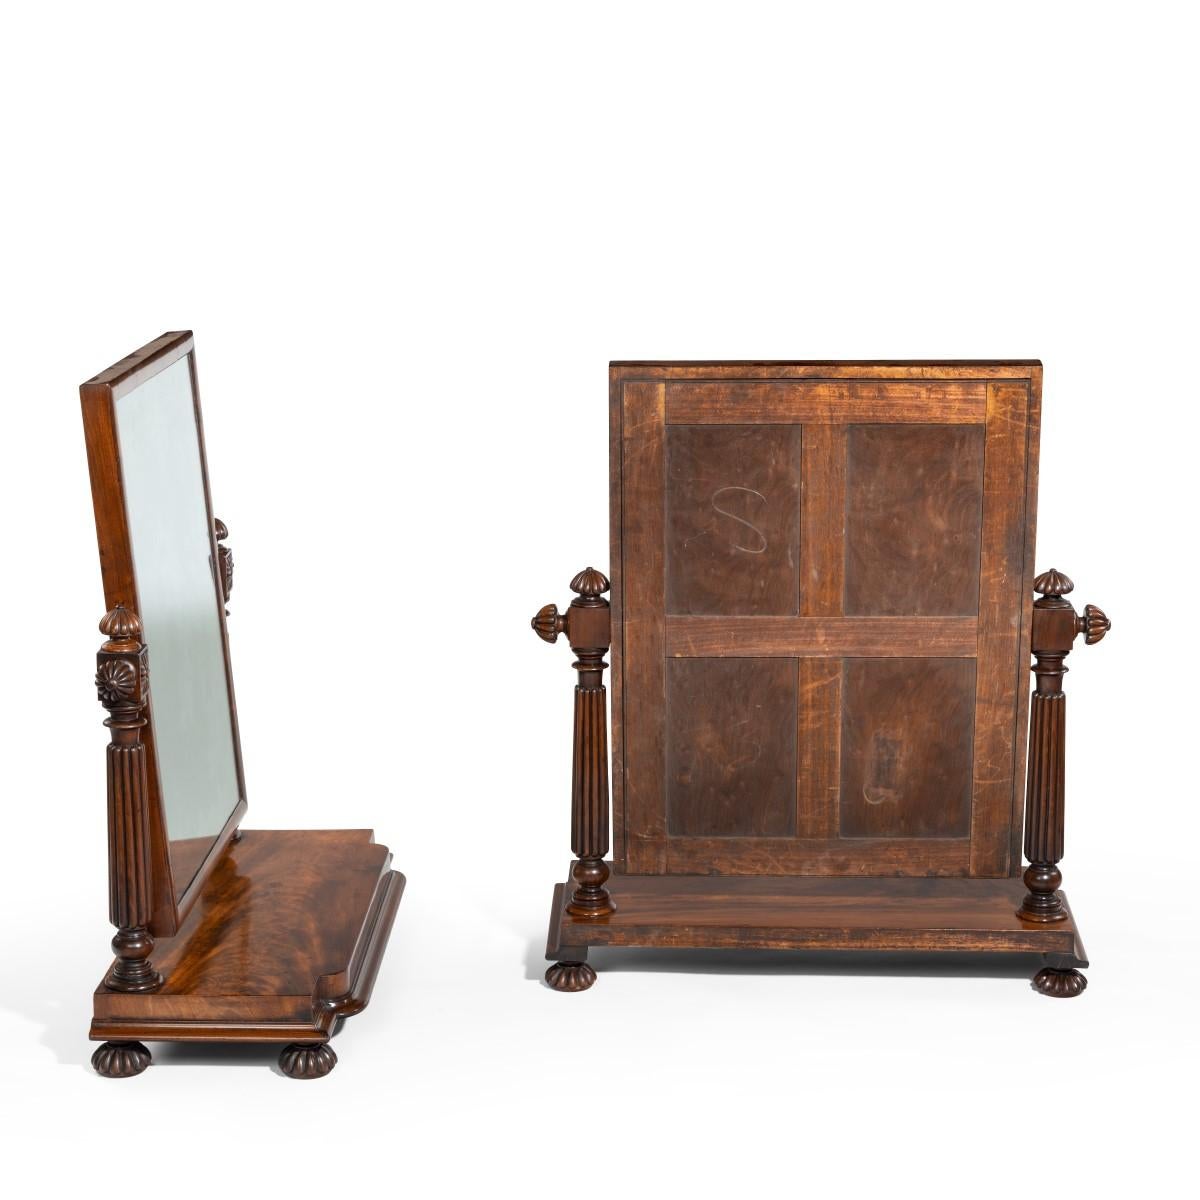 English Pair of George IV Mahogany Table Mirrors Attributed to Gillows